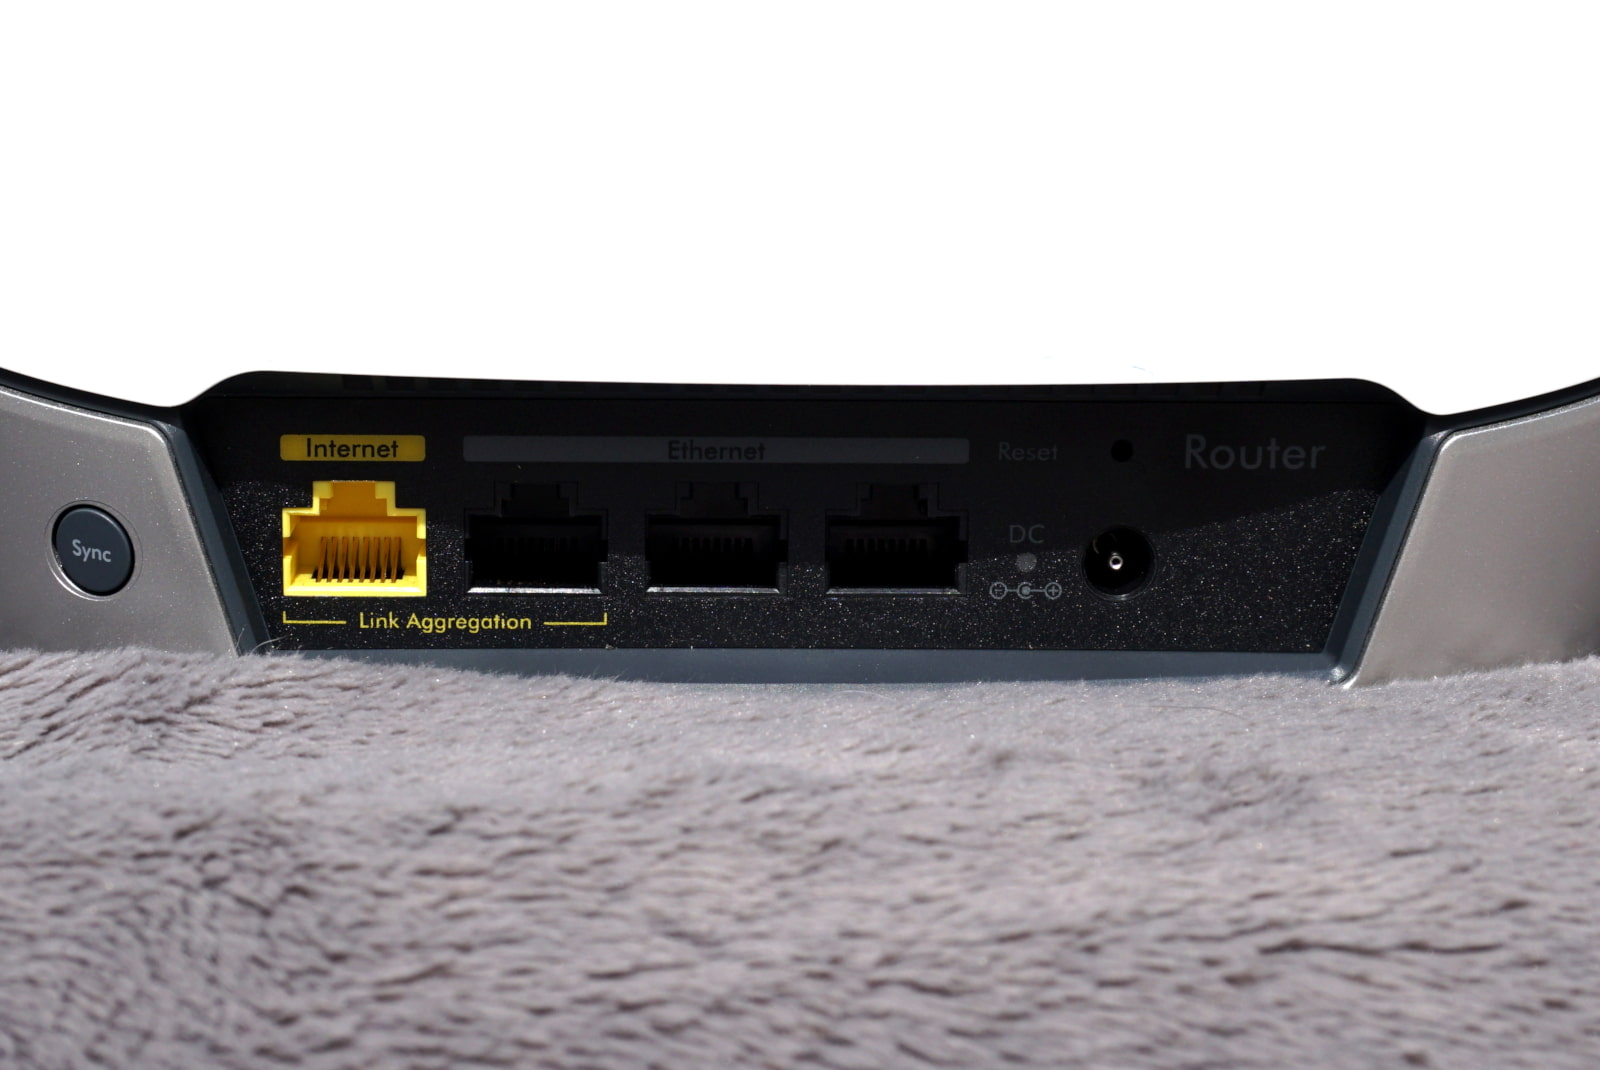 Router ports on rear of NETGEAR Orbi RBK752 router unit